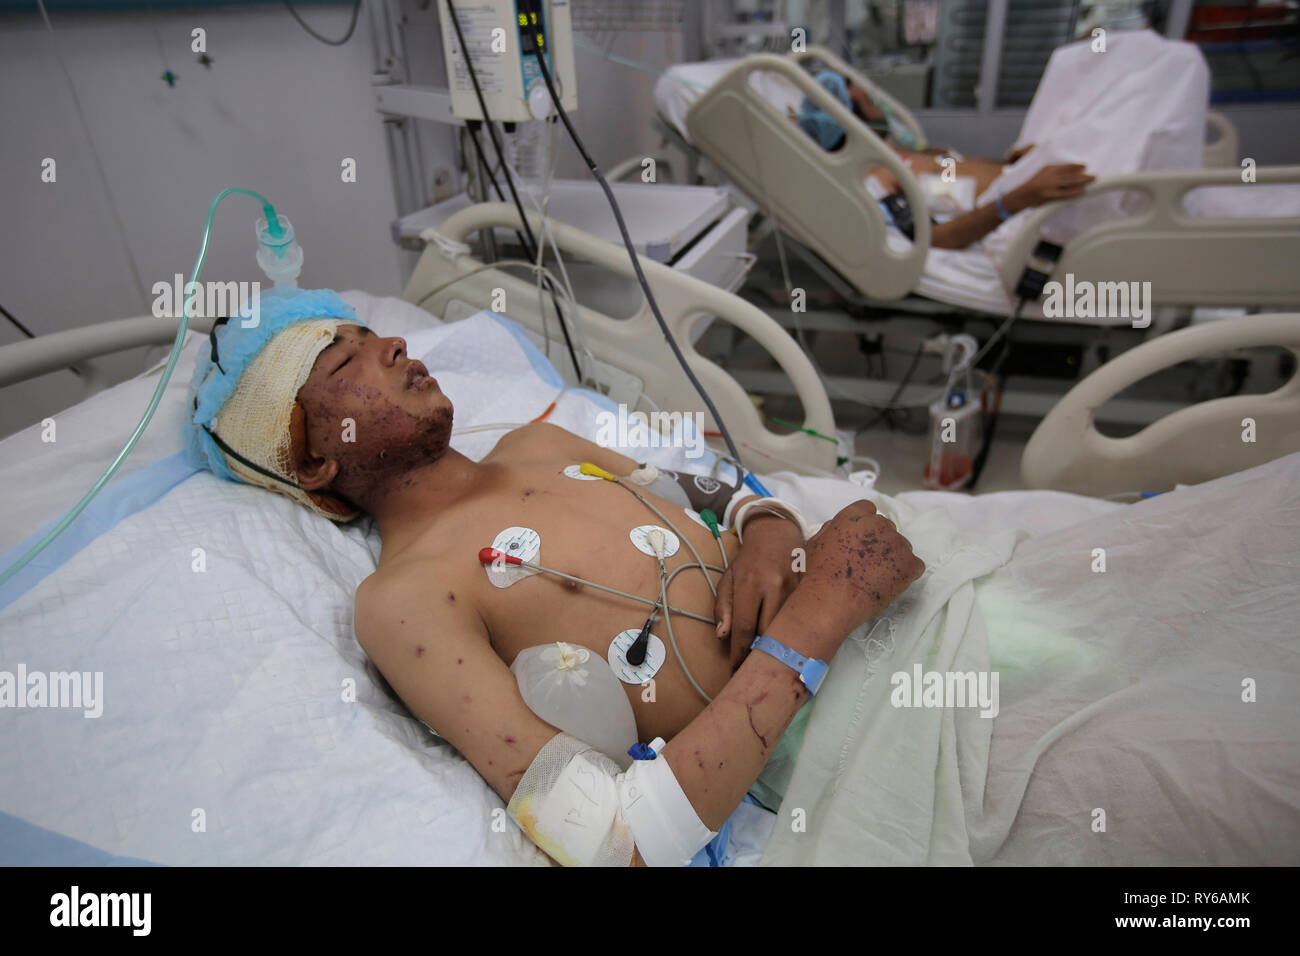 Sanaa, Yemen. 12th Mar, 2019. Yemeni men receive treatment from wounds sustained during a reported air strike at a hospital. Strikes in Yemen killed 22 people during a 48-hour period early this week, including a dozen children, according to the UN. Credit: Hani Al-Ansi/dpa/Alamy Live News Stock Photo